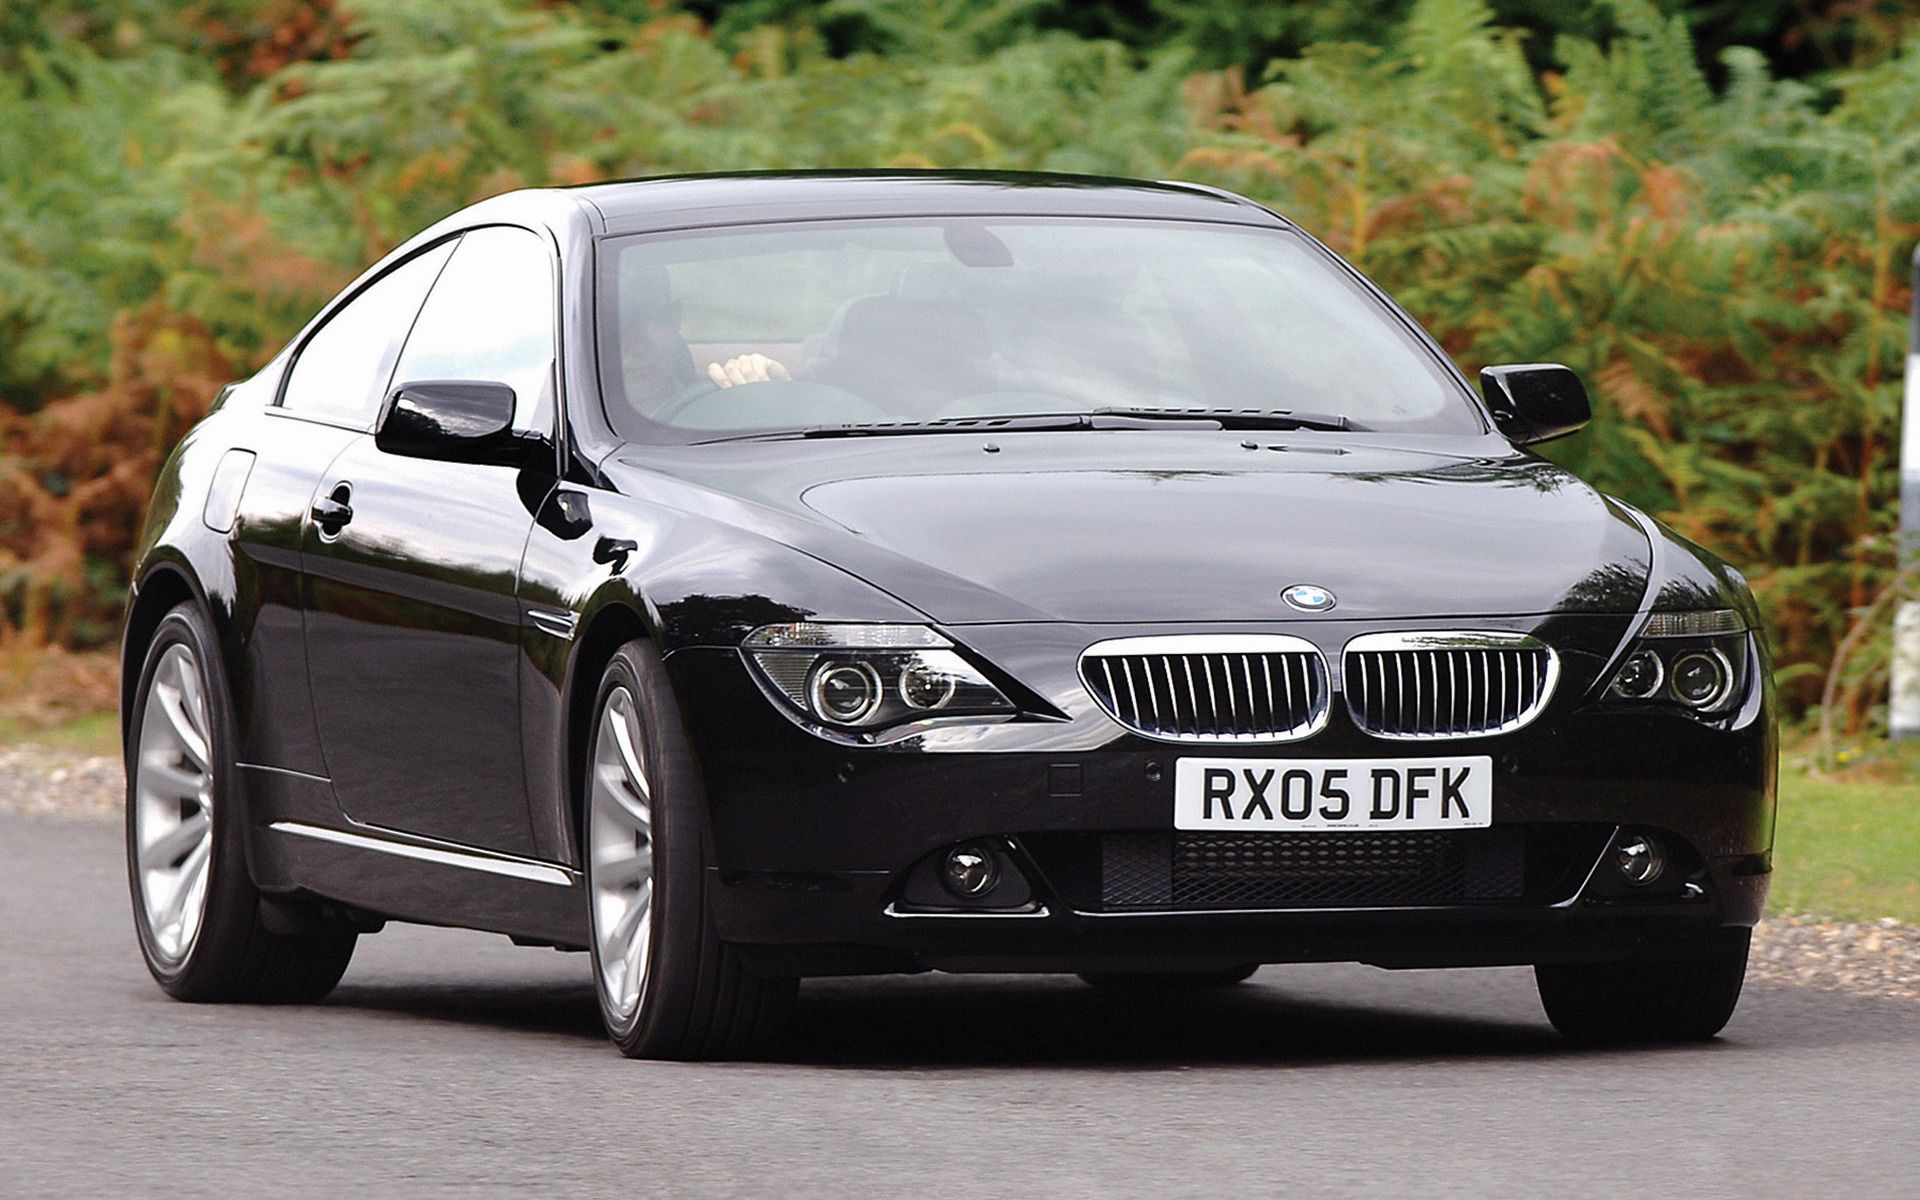 BMW 6 Series Coupe (UK) and HD Image